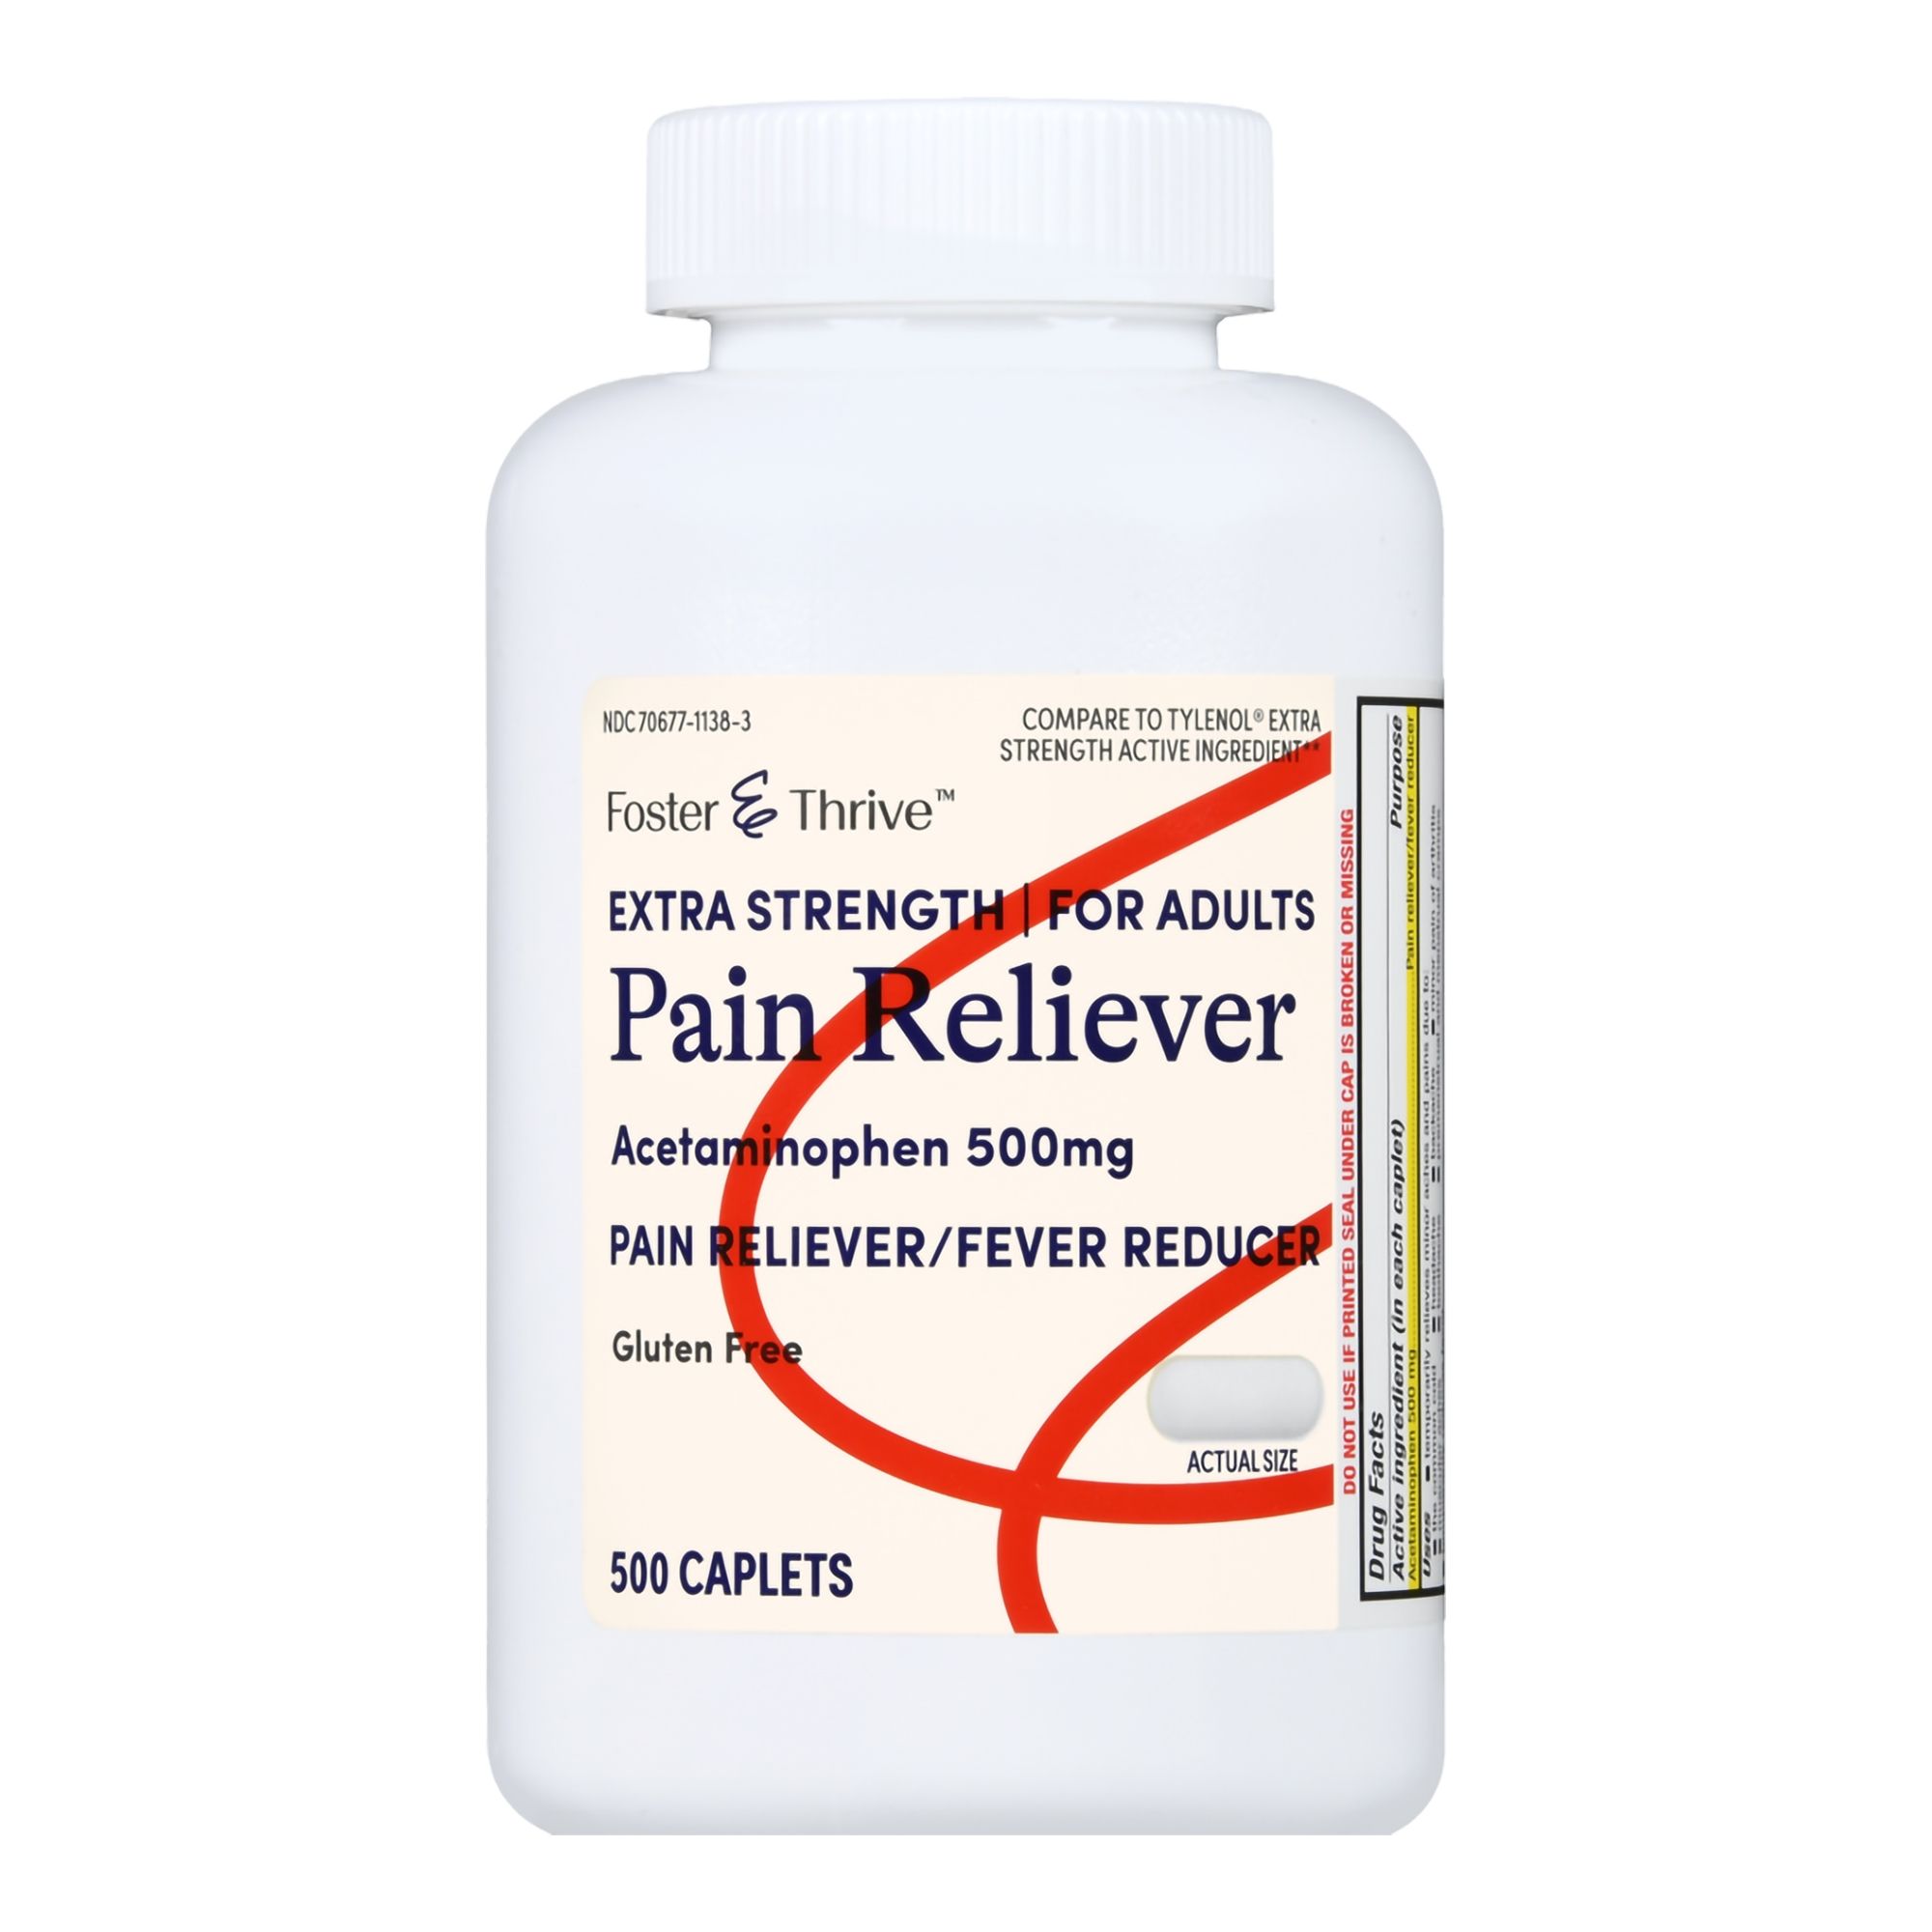 Foster & Thrive Adult Extra Strength Pain Reliever Acetaminophen Caplets, 500 mg - 500 ct